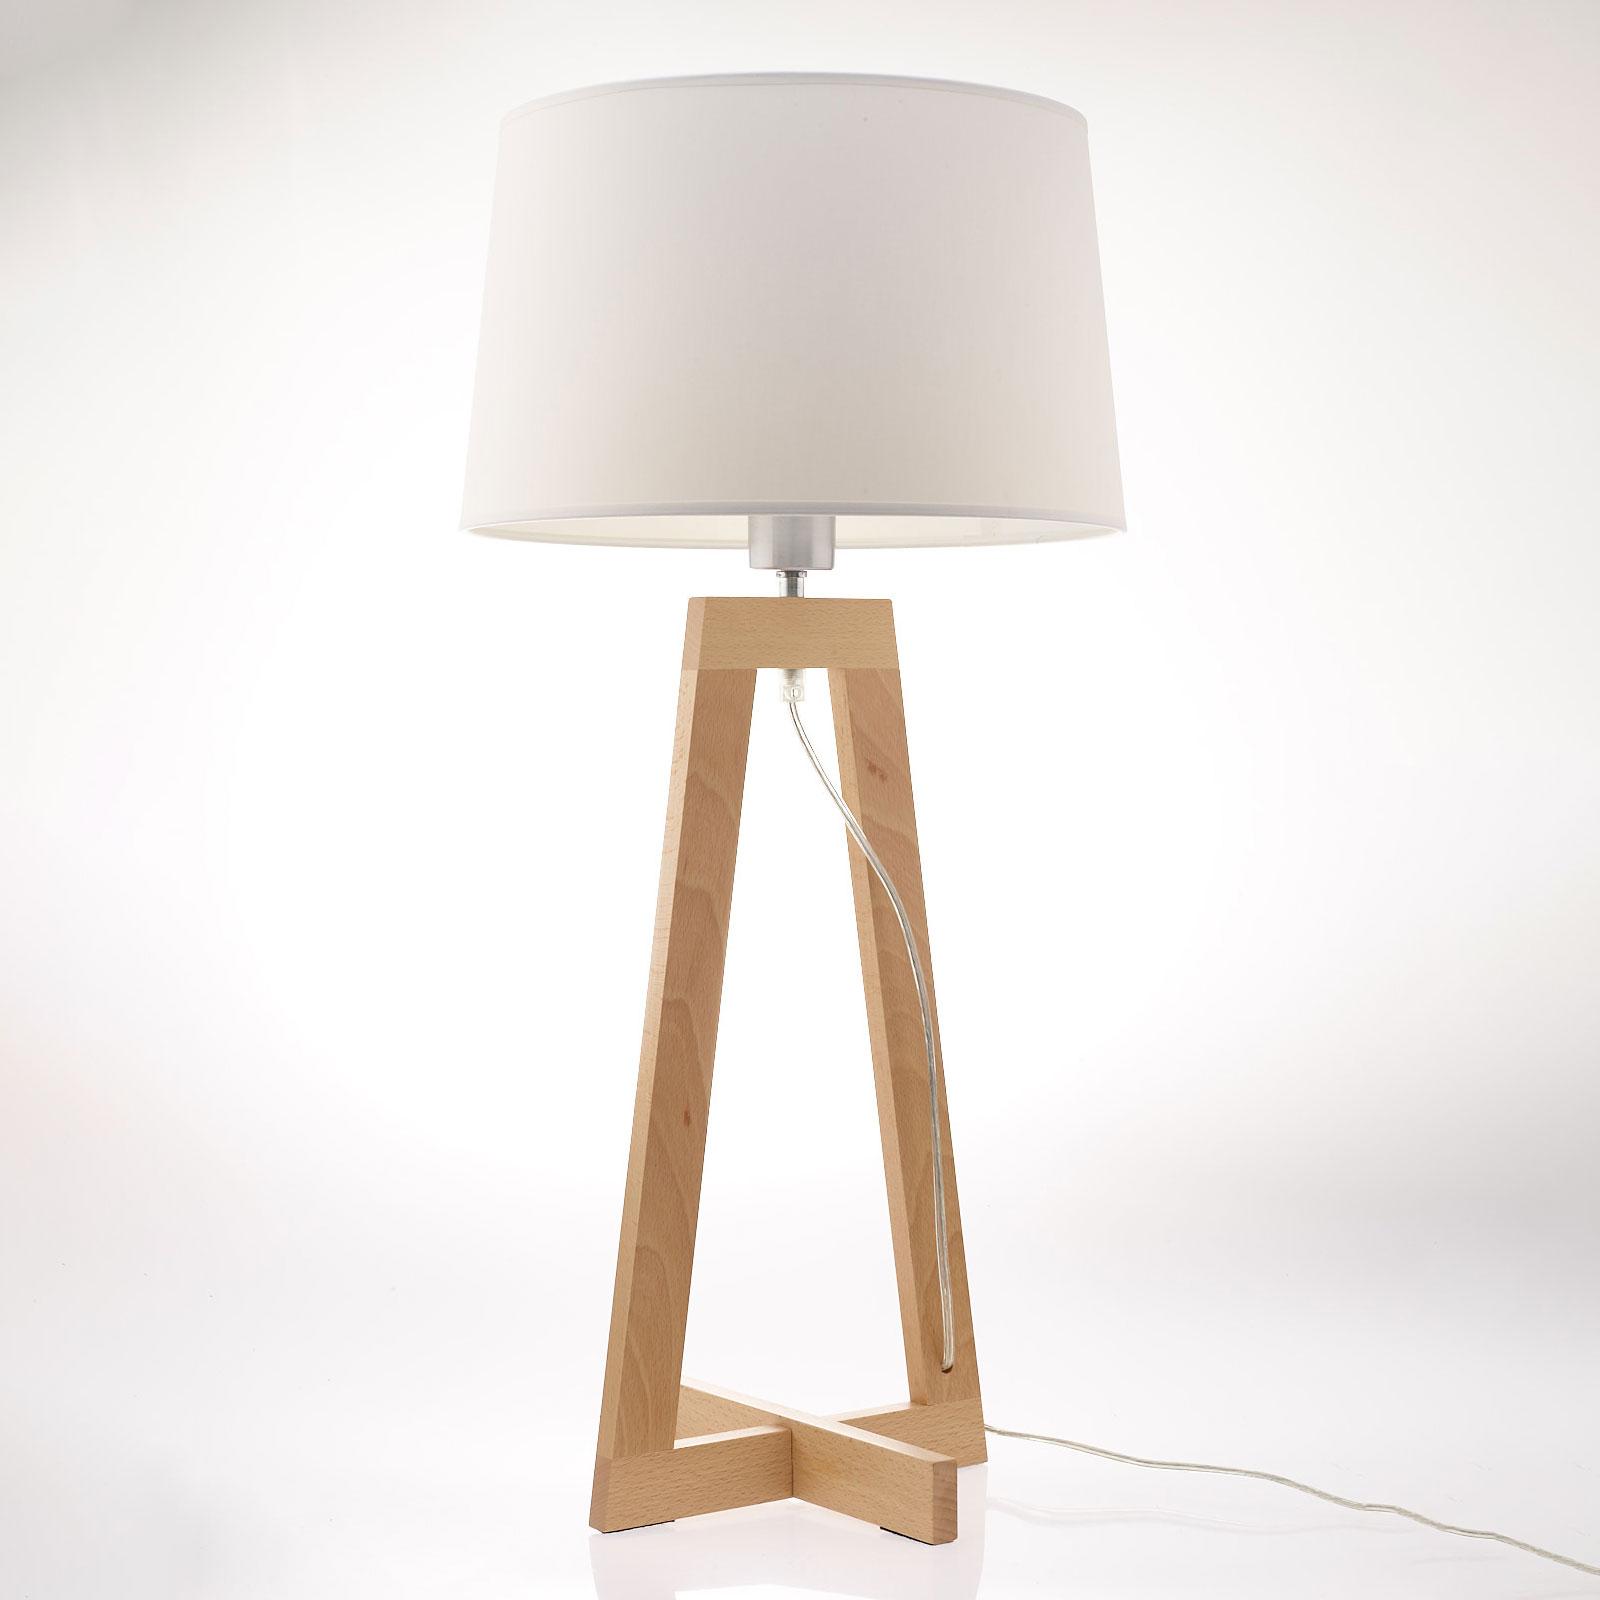 Sacha LT table lamp in fabric and wood